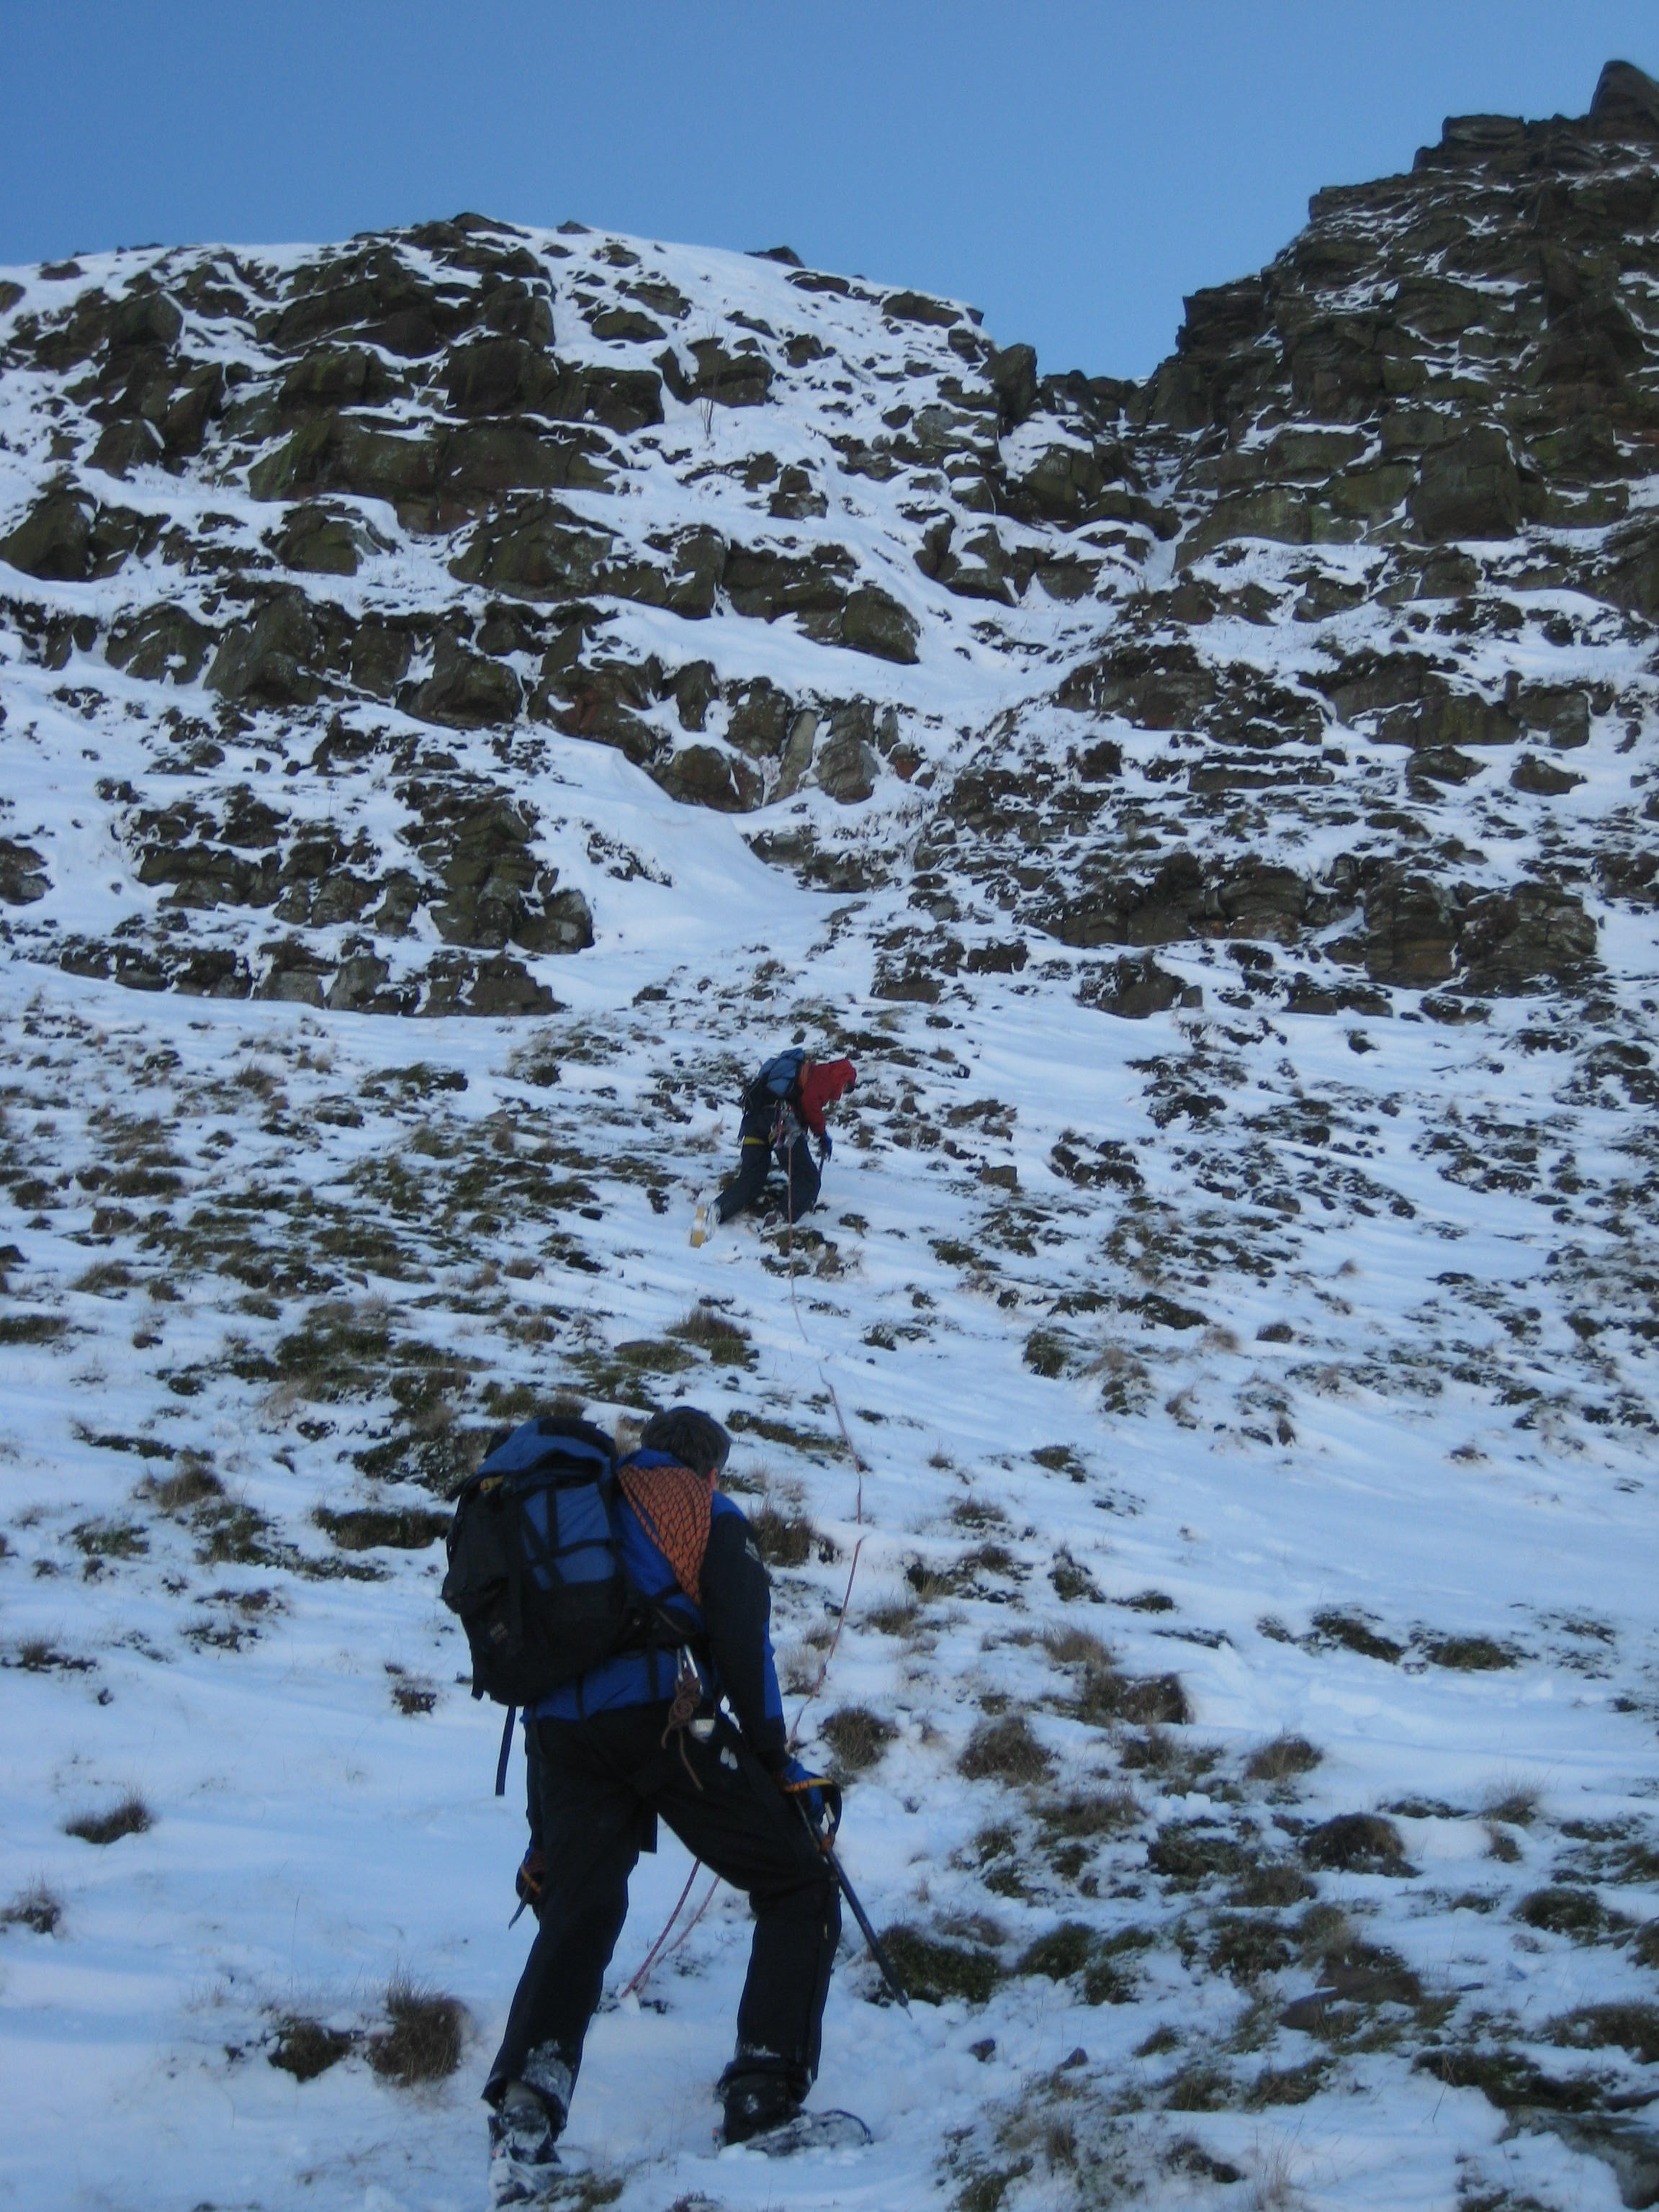 Approaching the gully